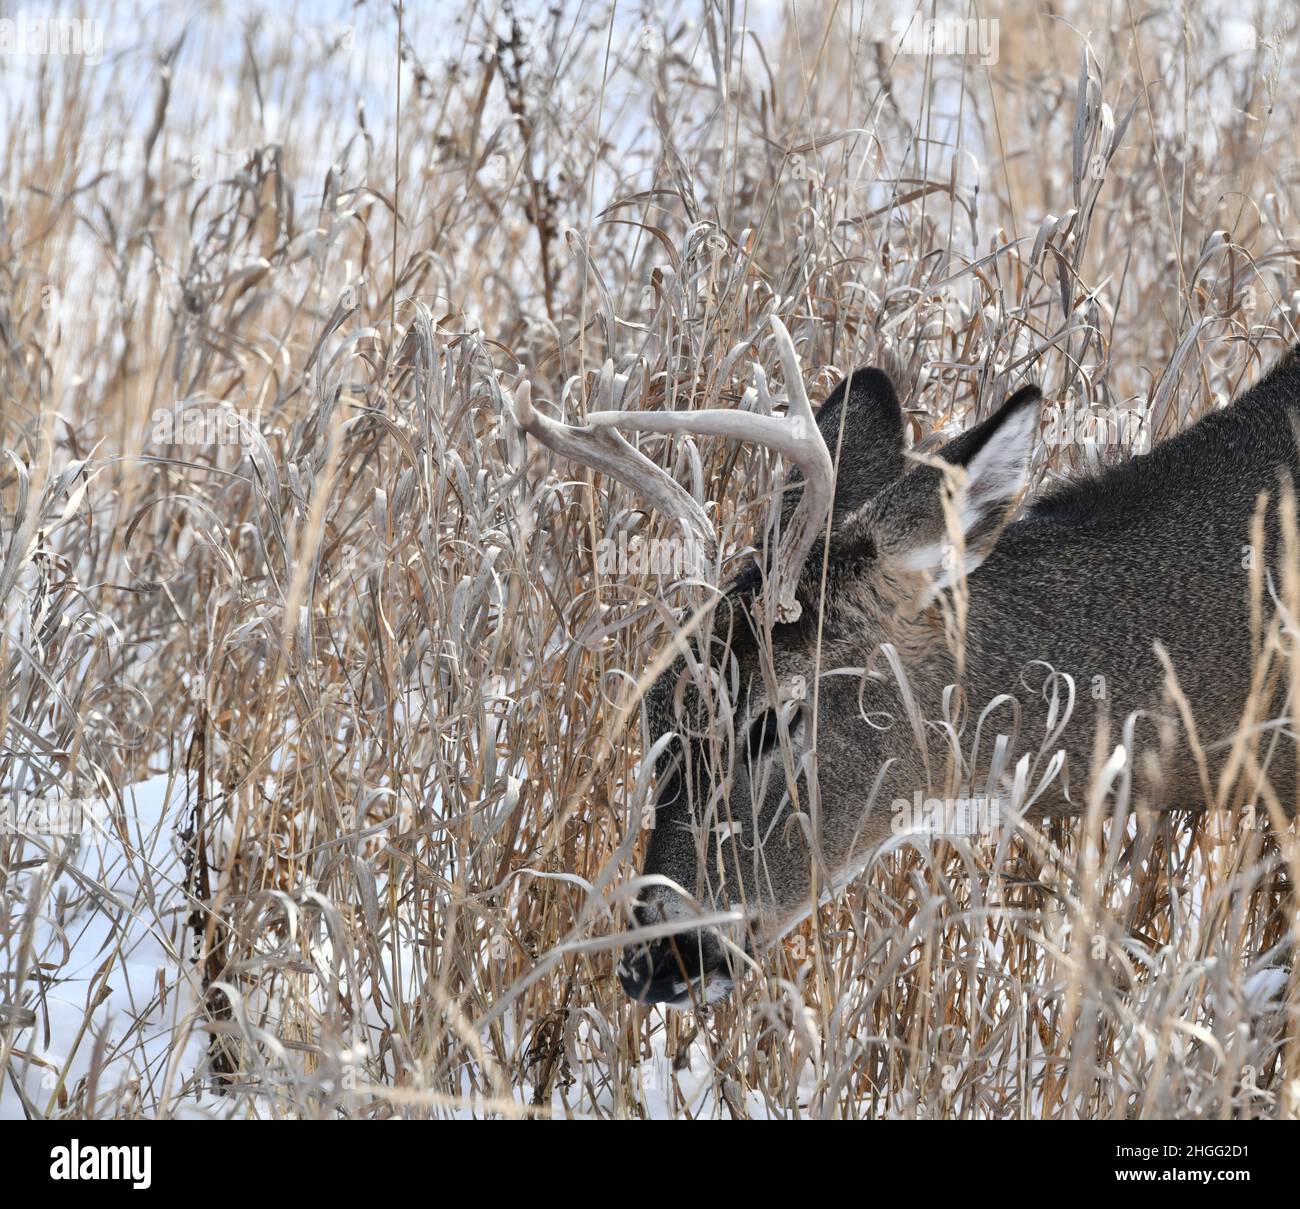 A white tailed buck eating dried grass on snow covered ground, by Thunder Bay, Ontario, Canada. Stock Photo